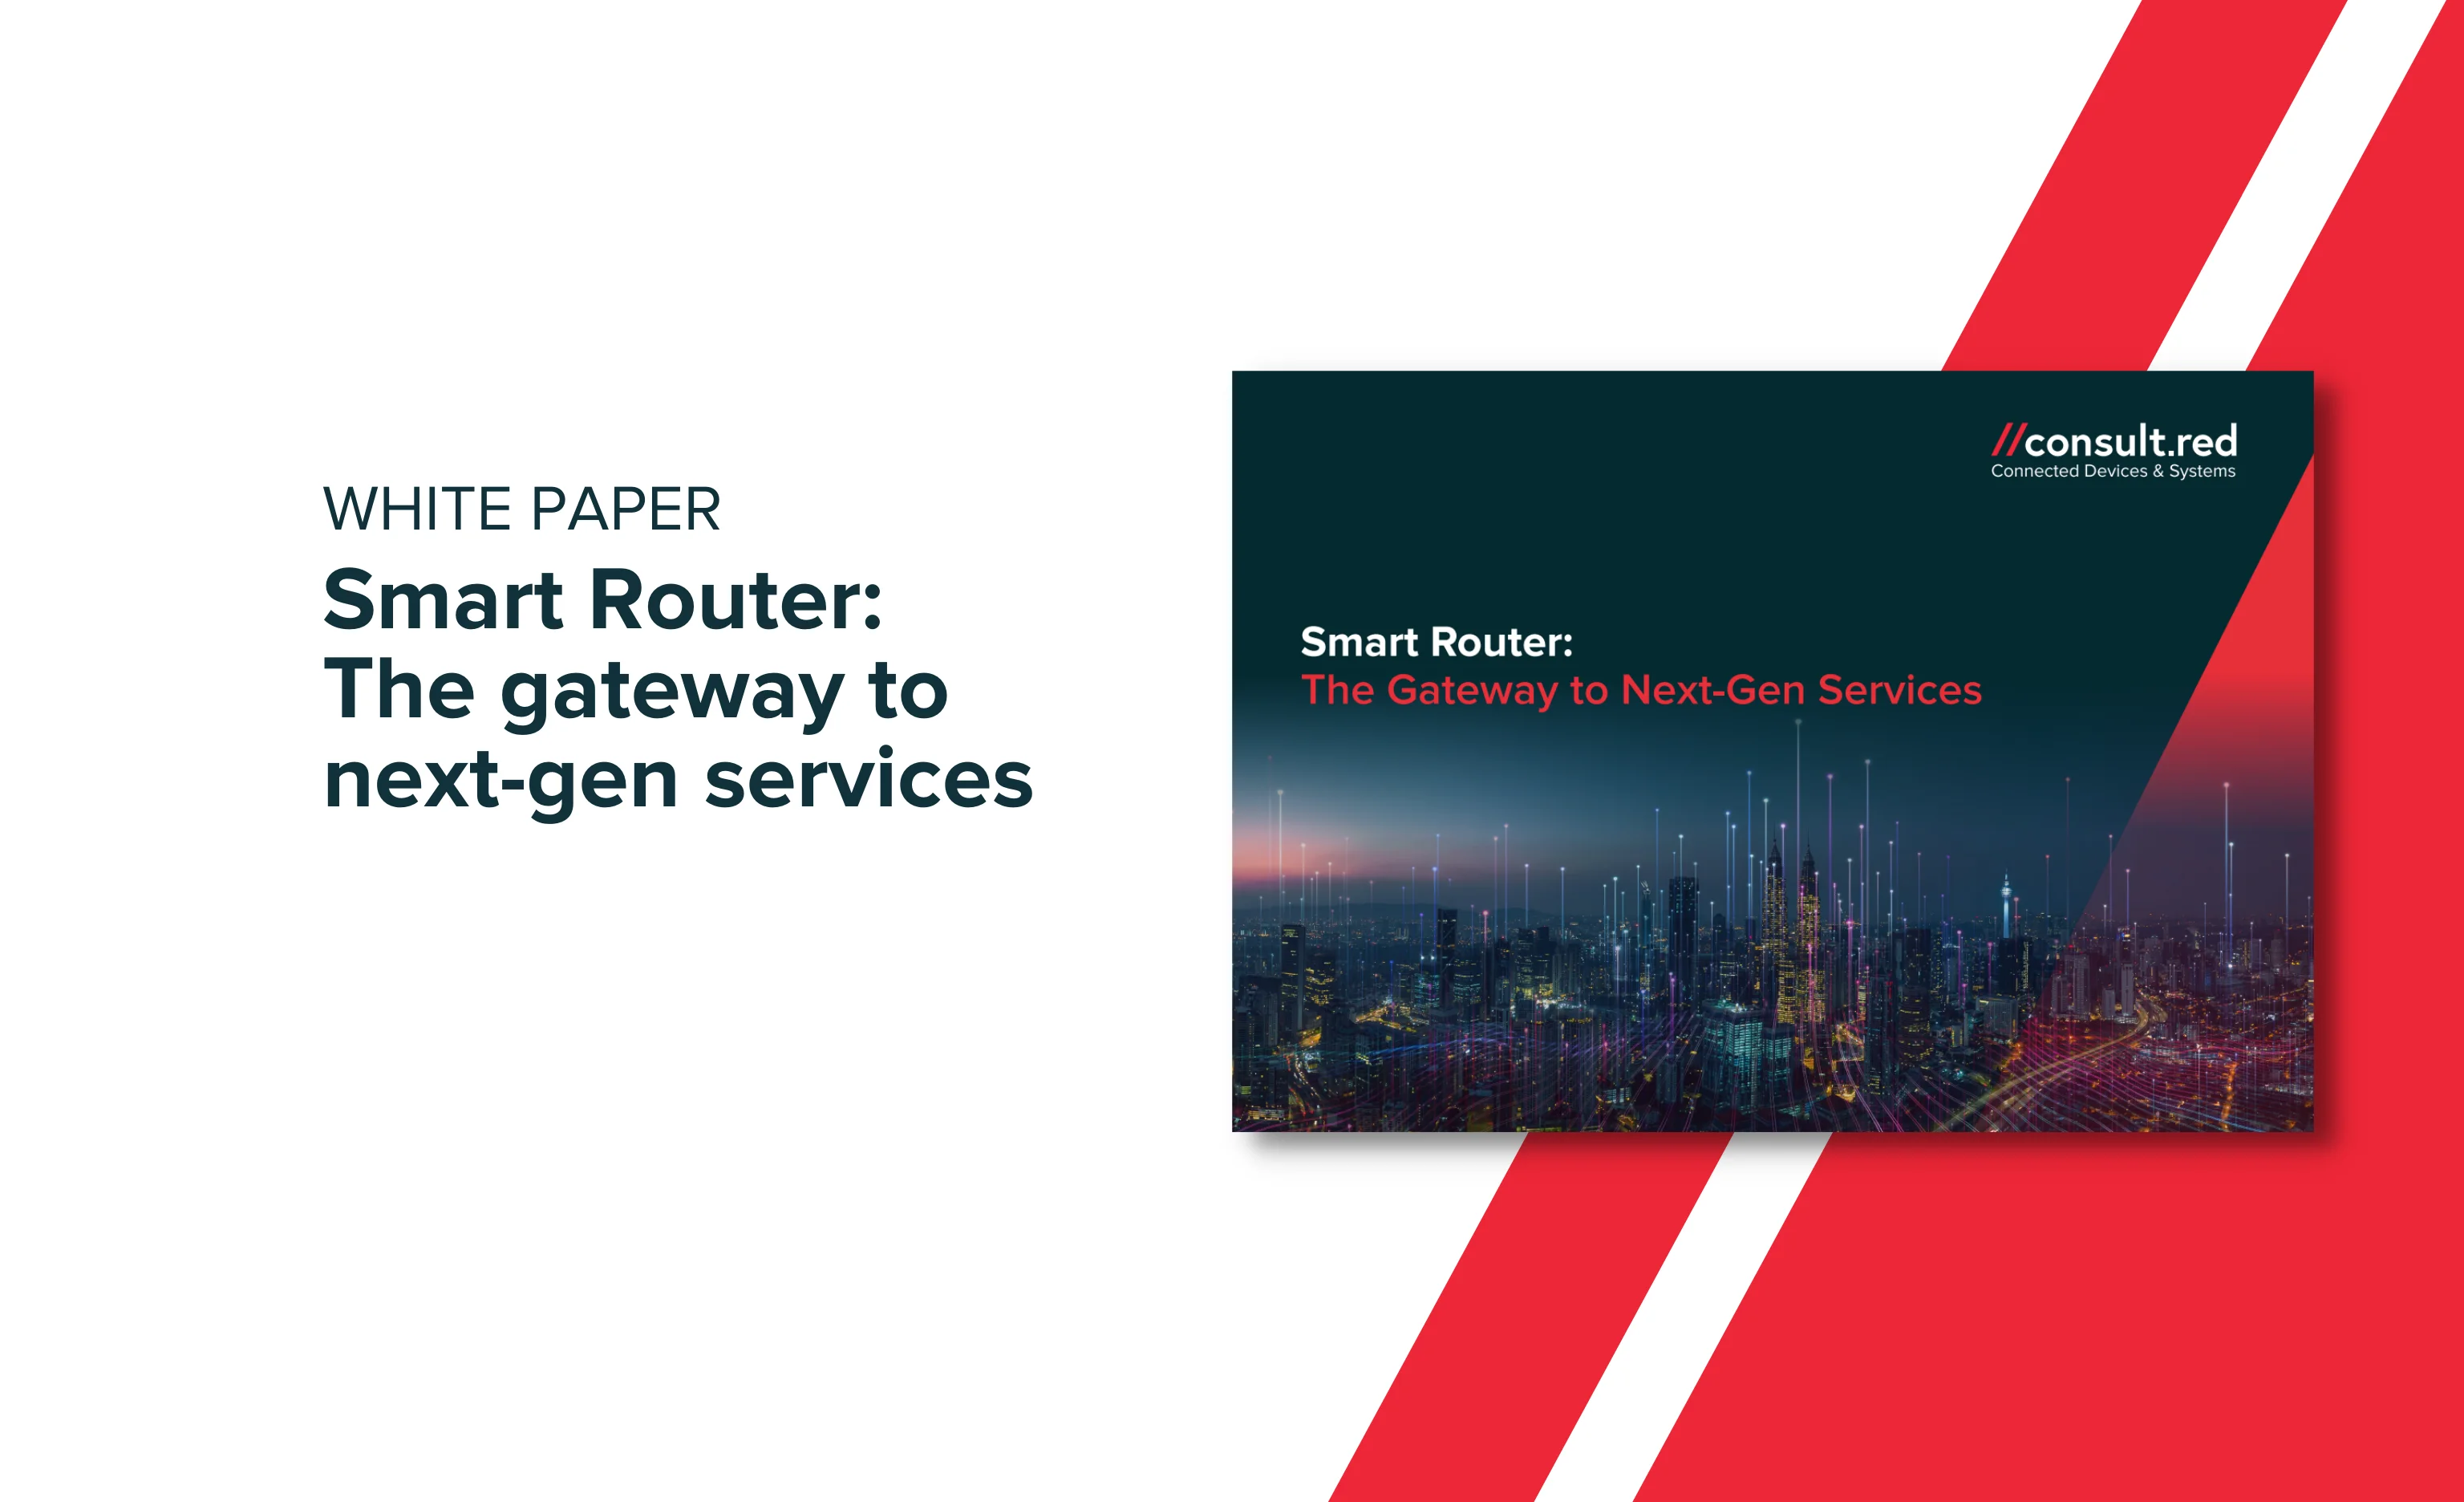 White Paper: Smart Router: The gateway to next-gen services